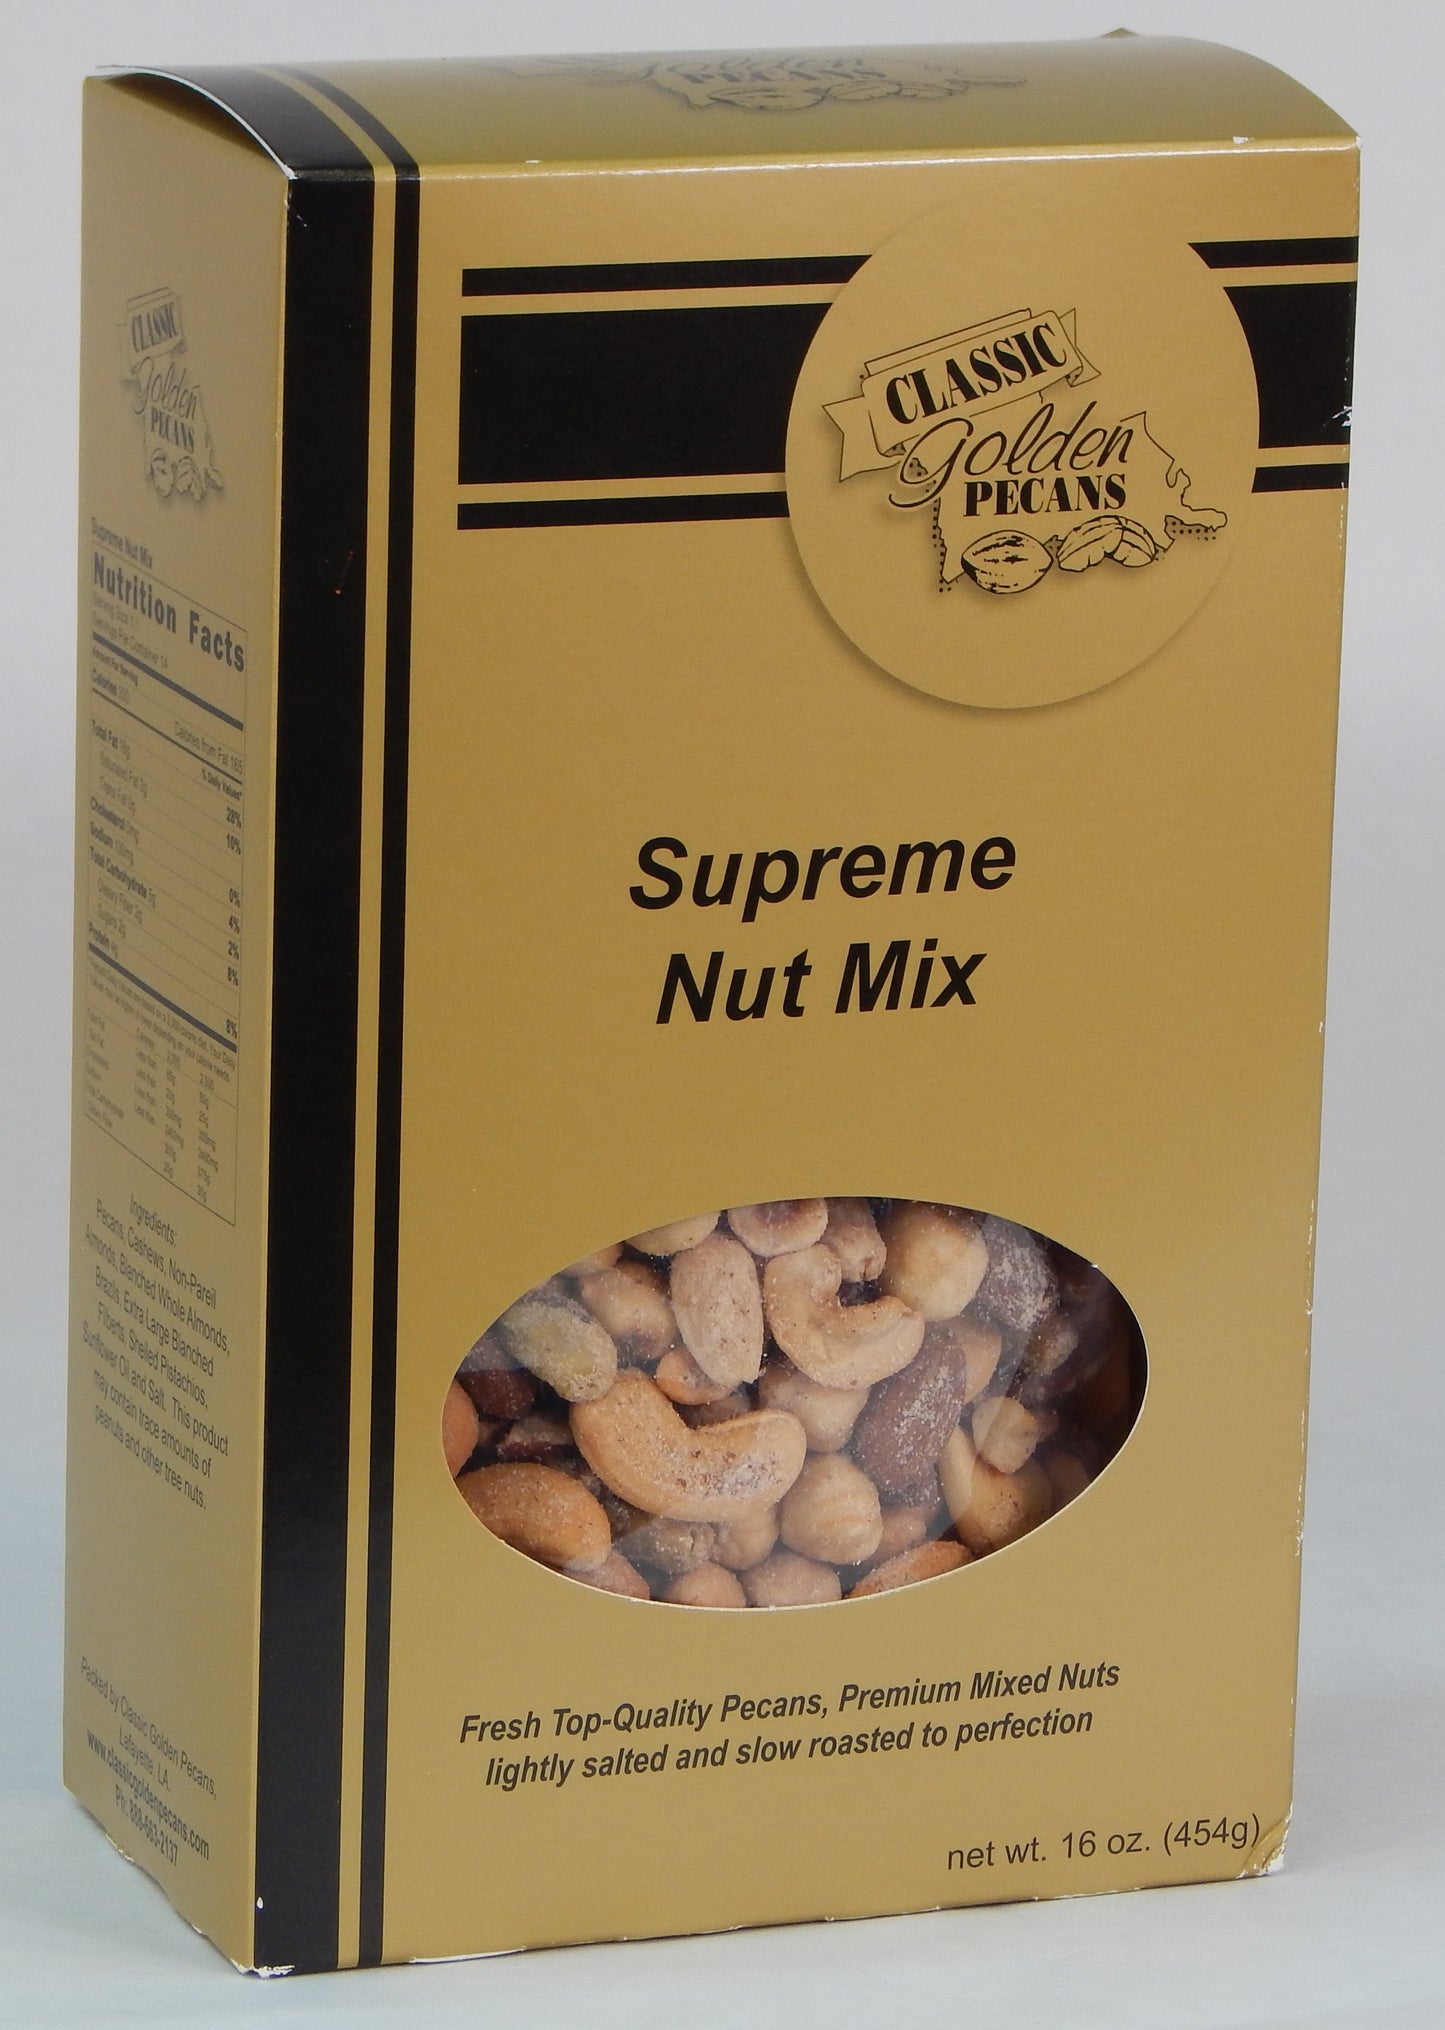 Supreme Nut Mix by Classic Golden Pecans